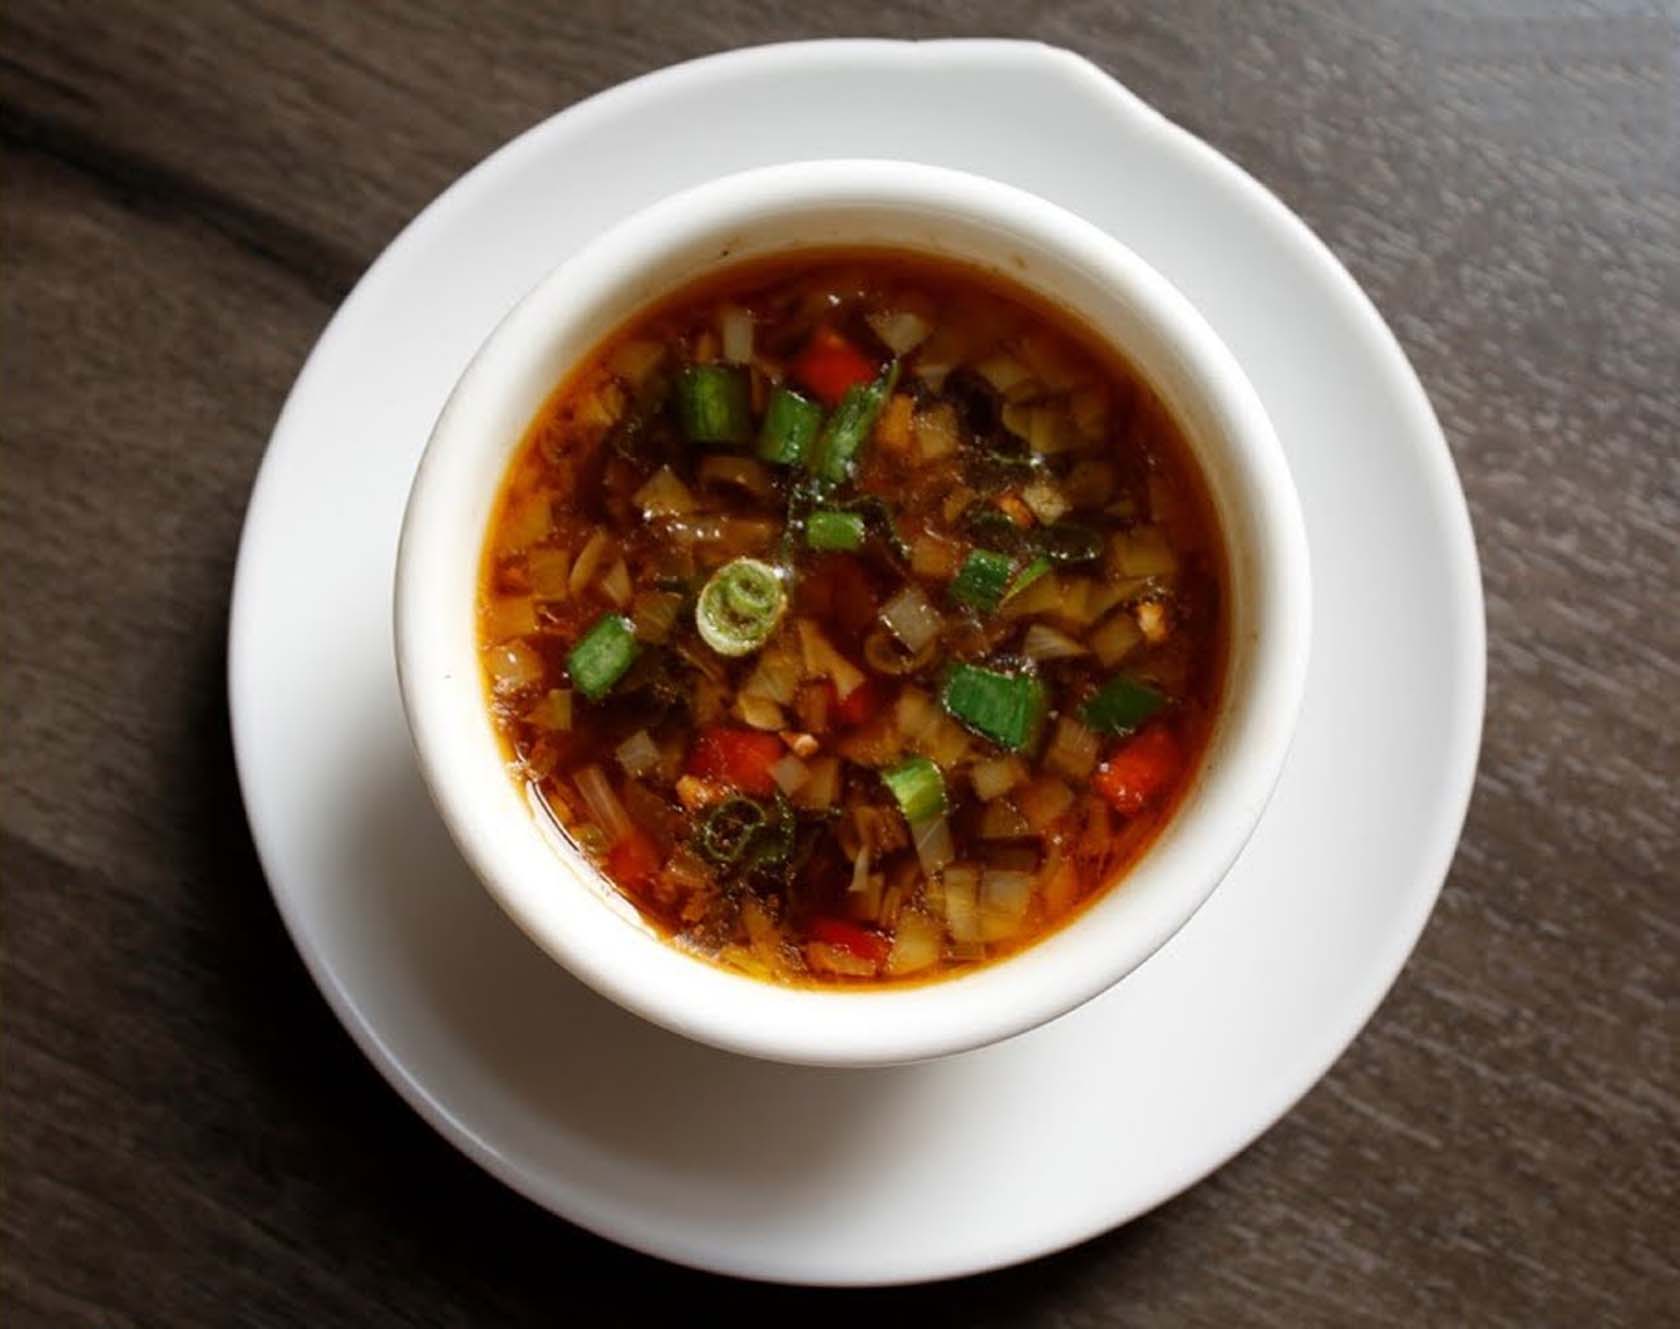 Sip On Veg Hot And Sour Soup This Winter!